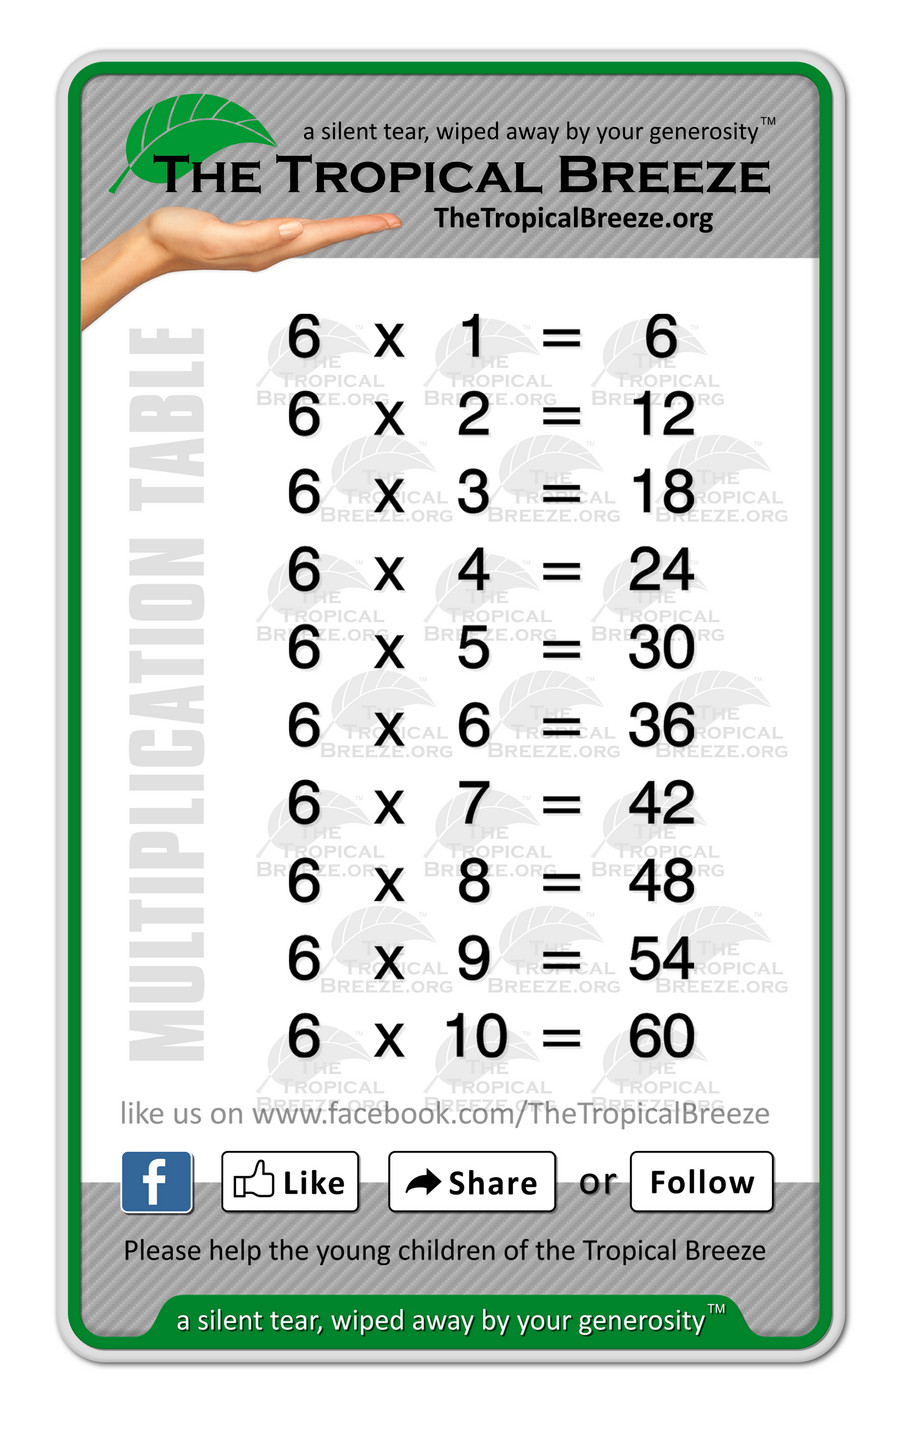 Download_free_math_multiplication_tables_from_www.TheTropicalBreeze.org - 6x